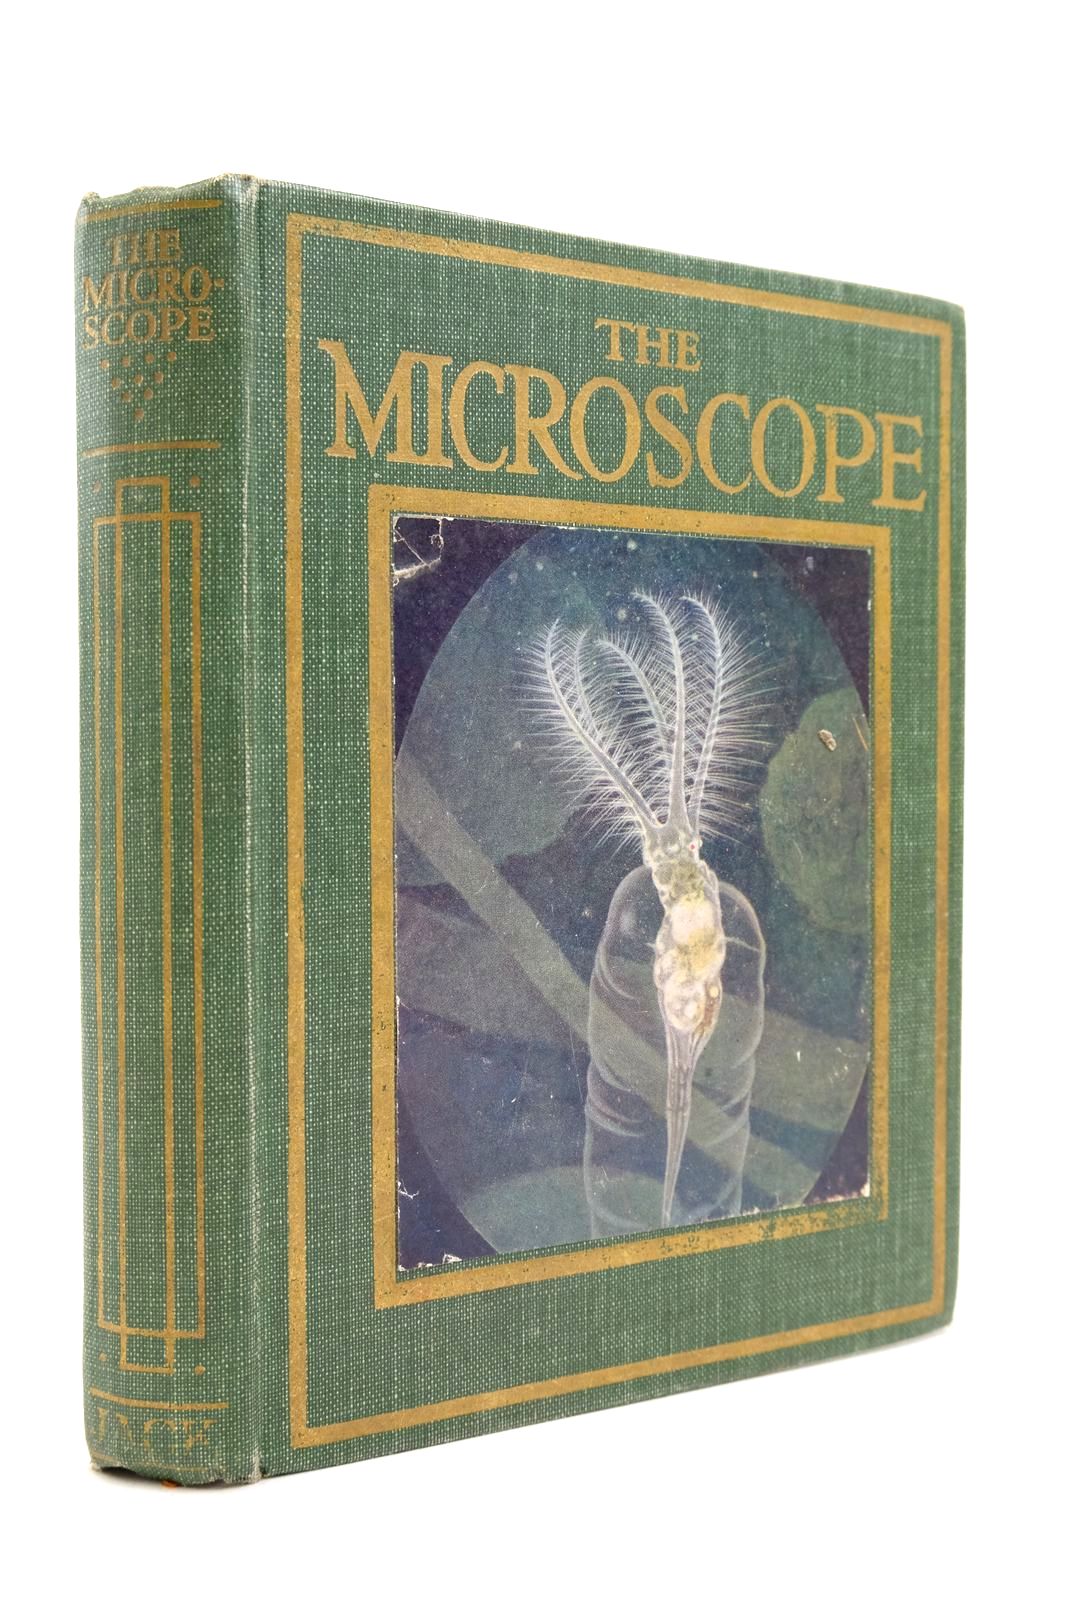 Photo of THE MICROSCOPE written by Hawks, Ellison published by T.C. &amp; E.C. Jack Ltd. (STOCK CODE: 2140784)  for sale by Stella & Rose's Books